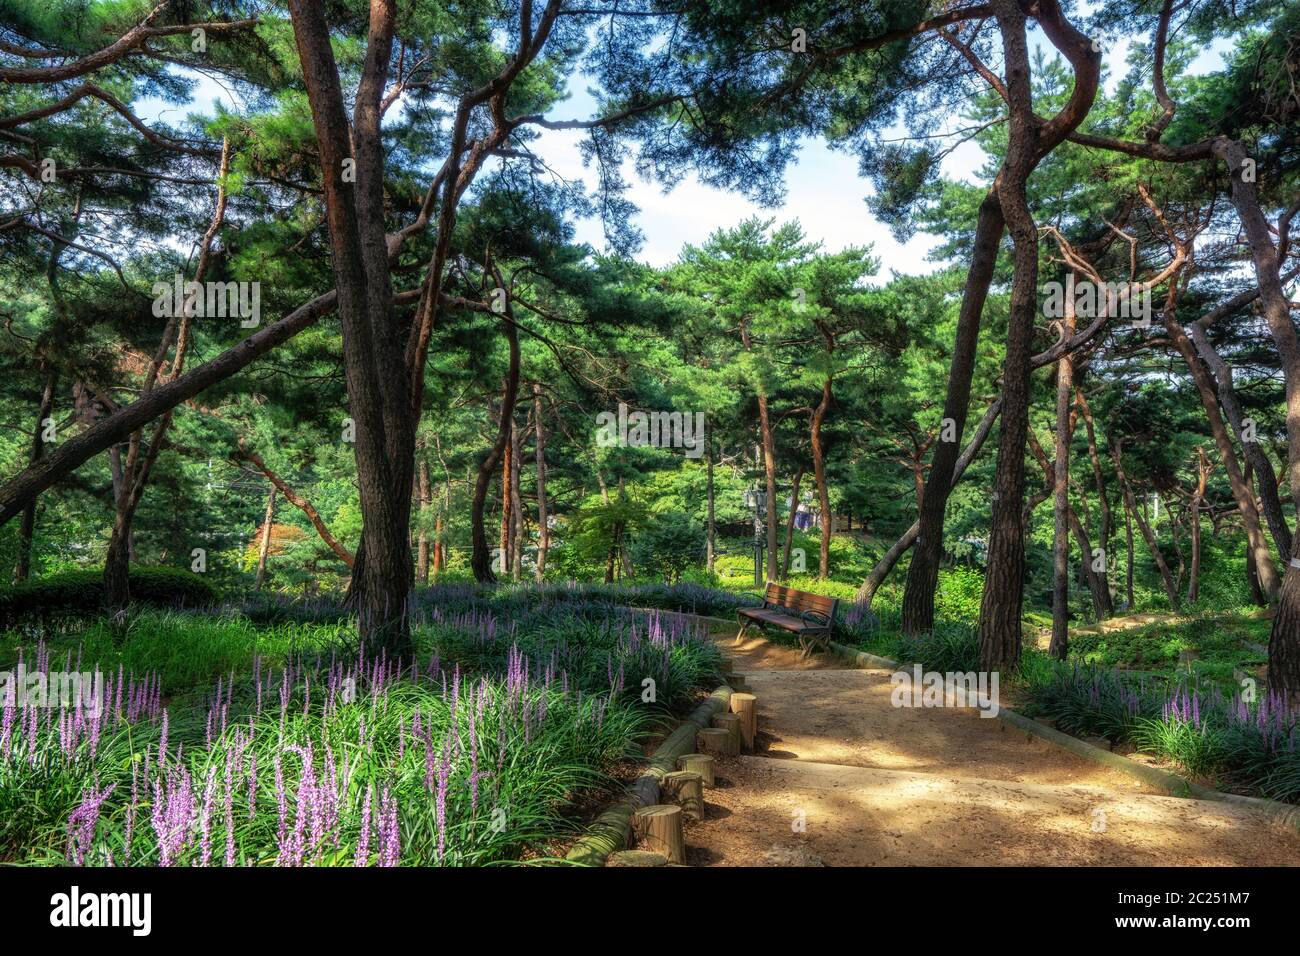 achasan ecological park pine tree forest with broadleaf liriope blooming. Taken in Seoul, South Korea Stock Photo